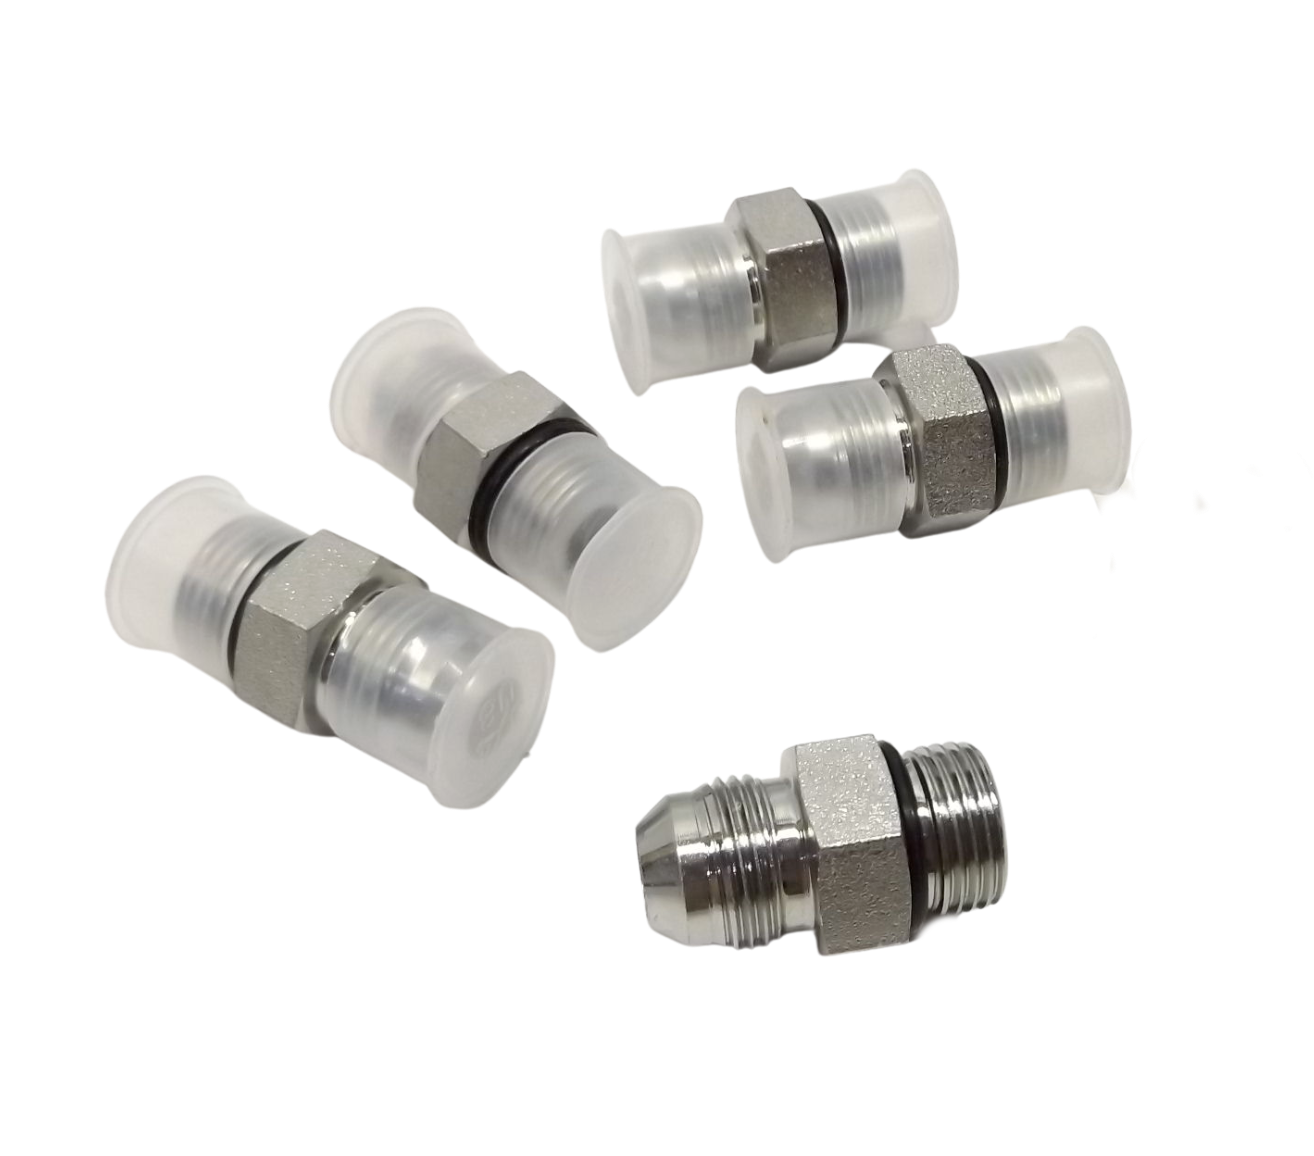 5-PACK IMPORTED 3/4 JIC X 3/4 MALE STRAIGHT O-RING HYDRAULIC FITTING